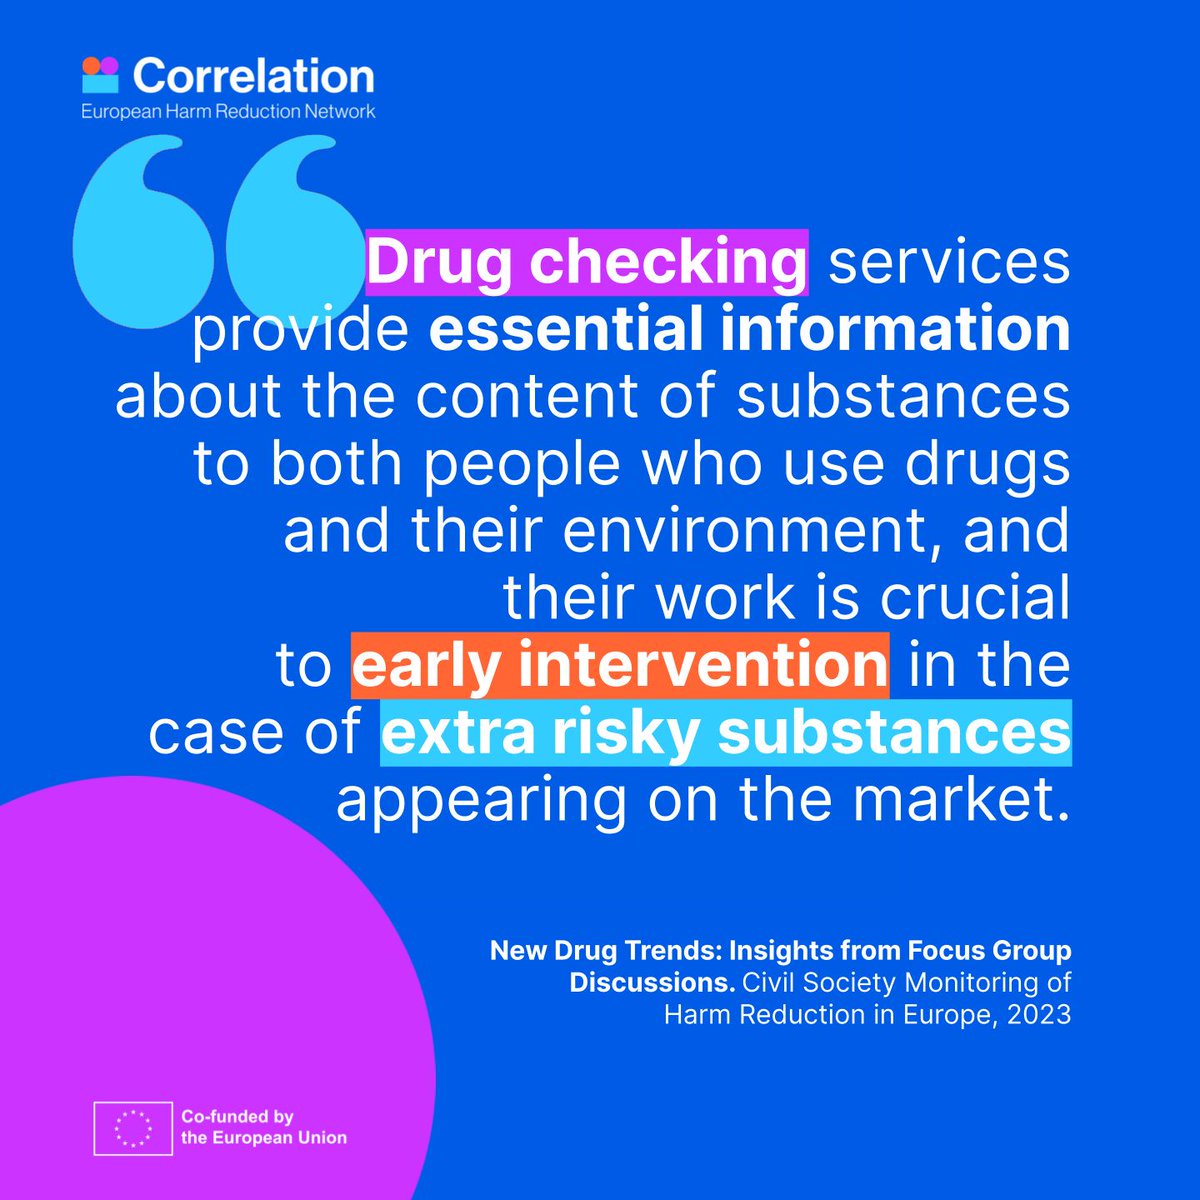 Today is #DrugCheckingDay! Let's advocate for accessible and reliable #DrugChecking to prevent harm!

🔗buff.ly/3SI3Fmp 

#MonitoringHREurope